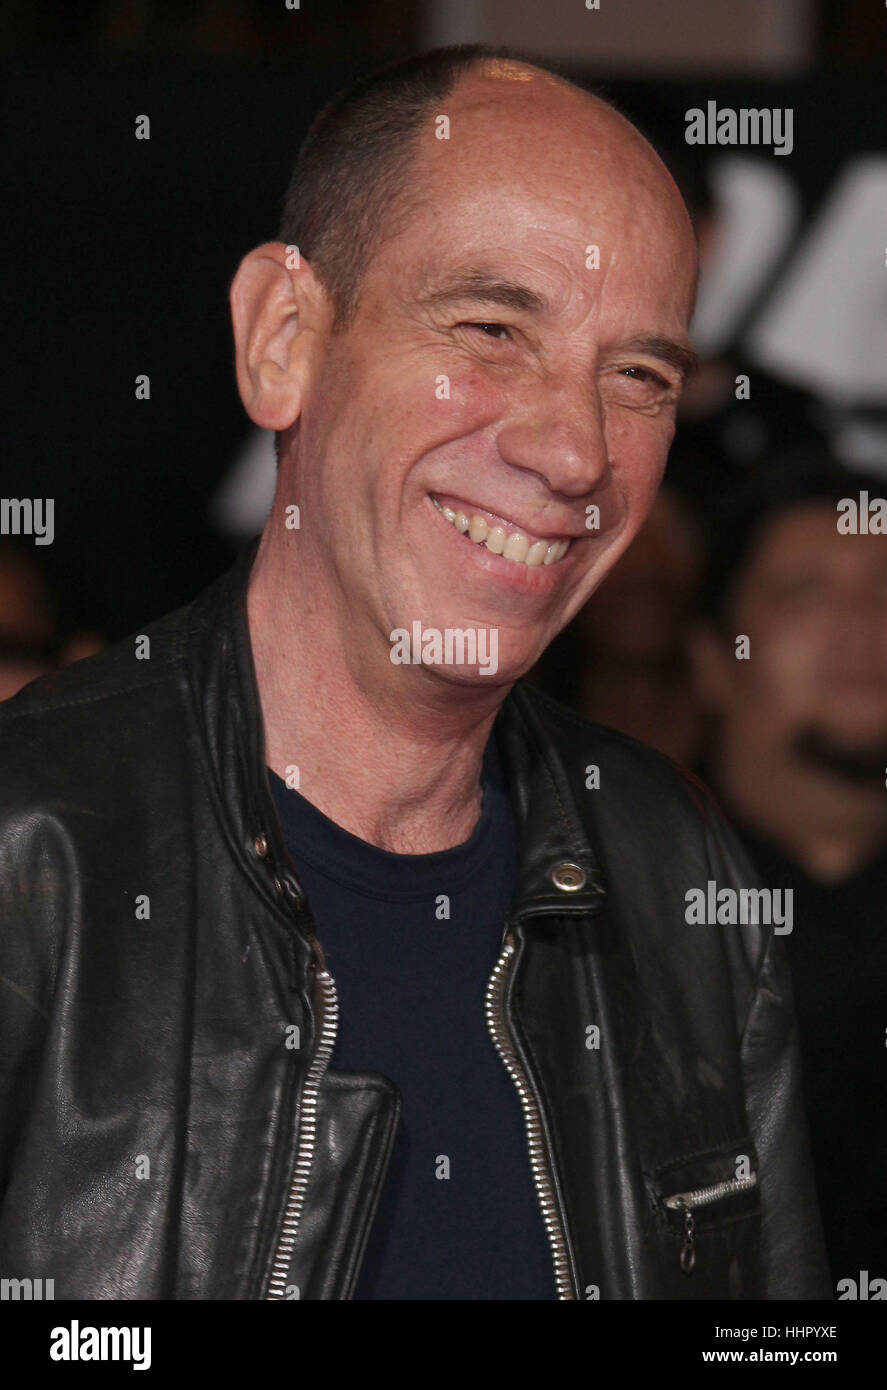 Hollywood, USA. 6th Mar, 2014. 'NCIS: Los Angeles' star Miguel Ferrer has died at age 61 after a battle with cancer. Jose Ferrer and singer Rosemary Clooney were his parents and George Clooney was a first cousin. File Photo: 6 March 2014 - Hollywood, California - Miguel Ferrer. ''Need For Speed'' Los Angeles Premiere held at the TCL Chinese Theatre. Photo Credit: Russ Elliot/AdMedia Credit: Russ Elliot/AdMedia/ZUMA Wire/Alamy Live News Stock Photo